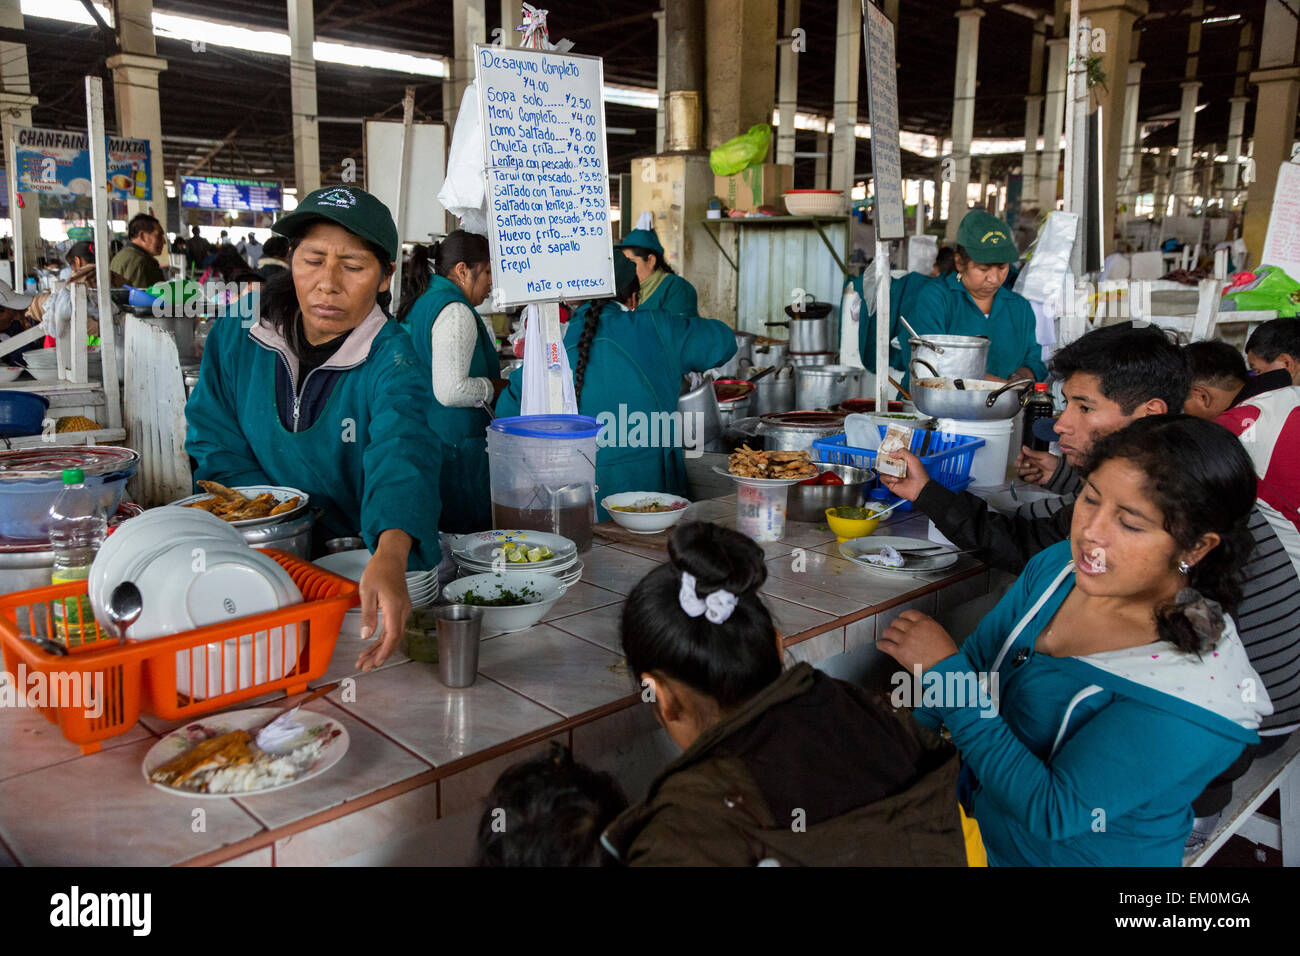 Peru, Cusco, San Pedro Market.  Customers Eating in the Food Court Area of the Market. Stock Photo